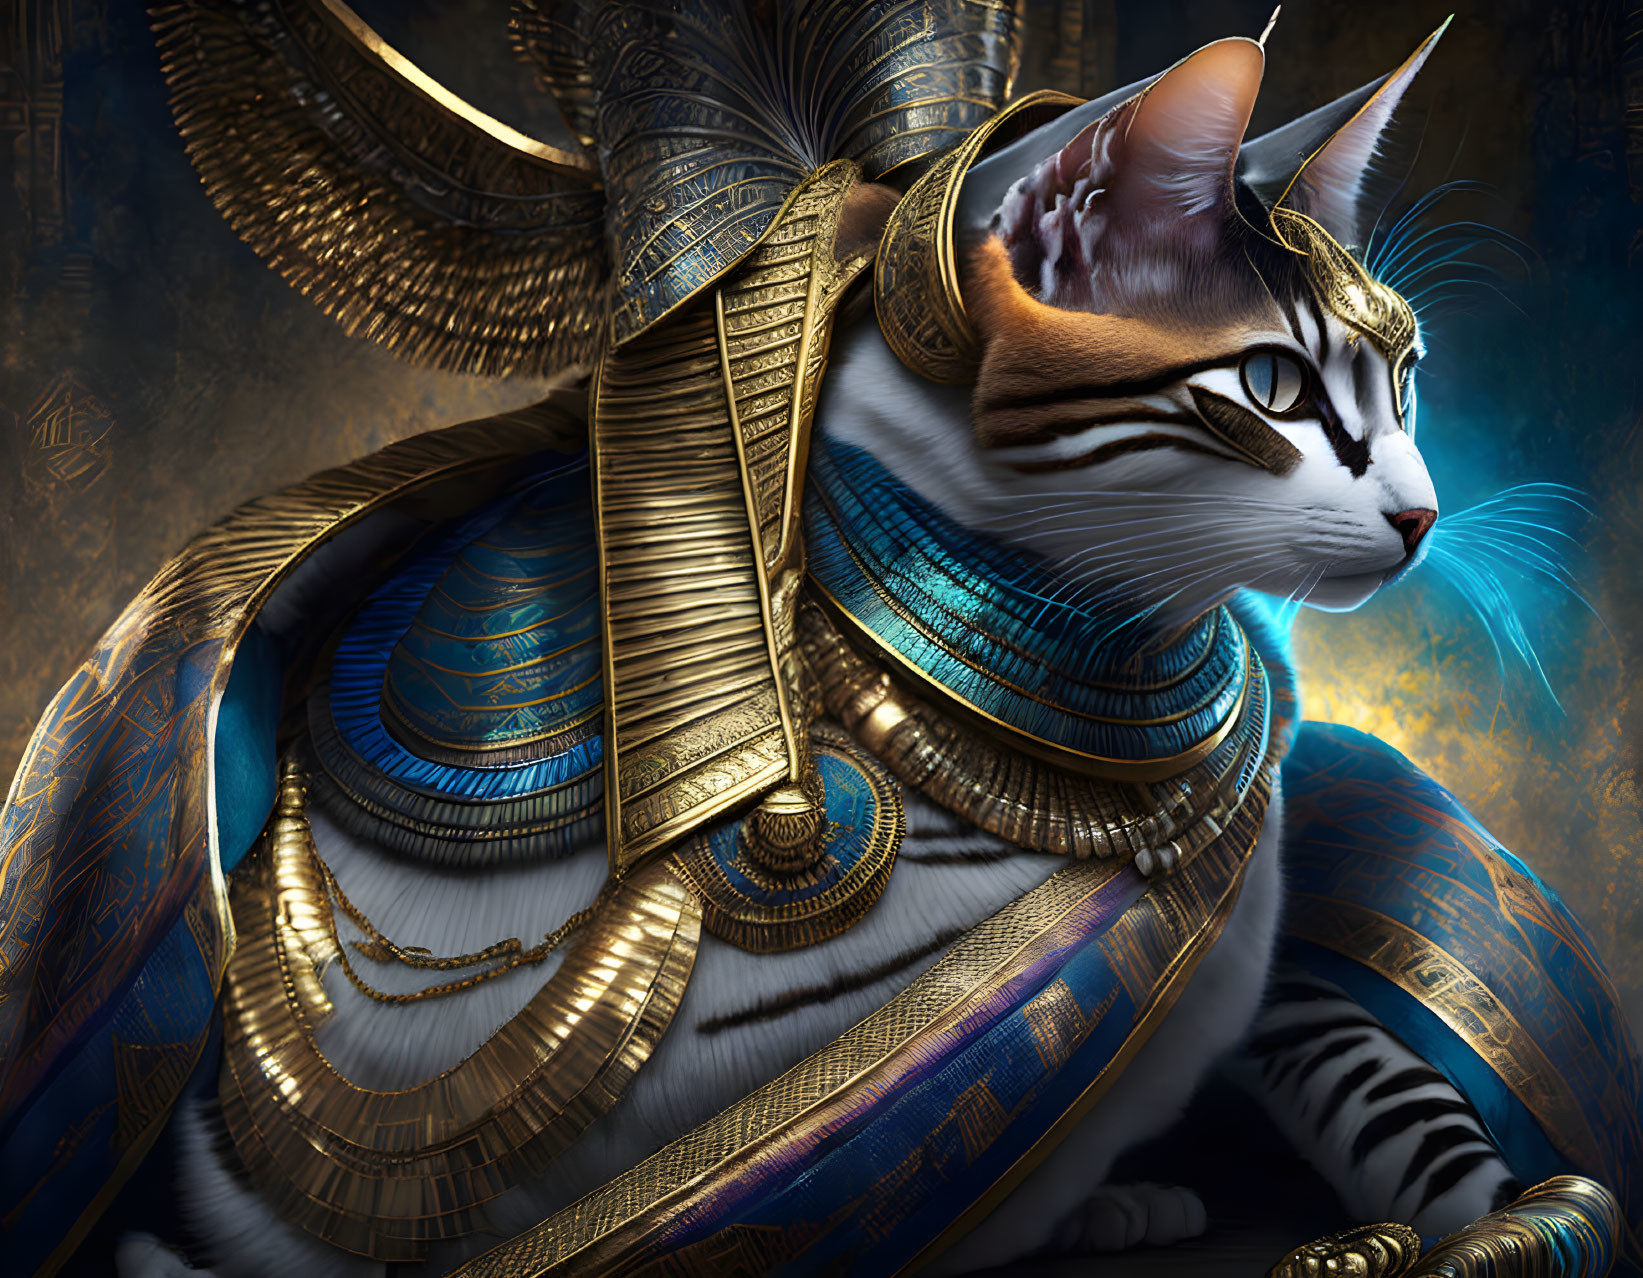 Detailed illustration of regal cat in Egyptian-style armor on intricate gold background